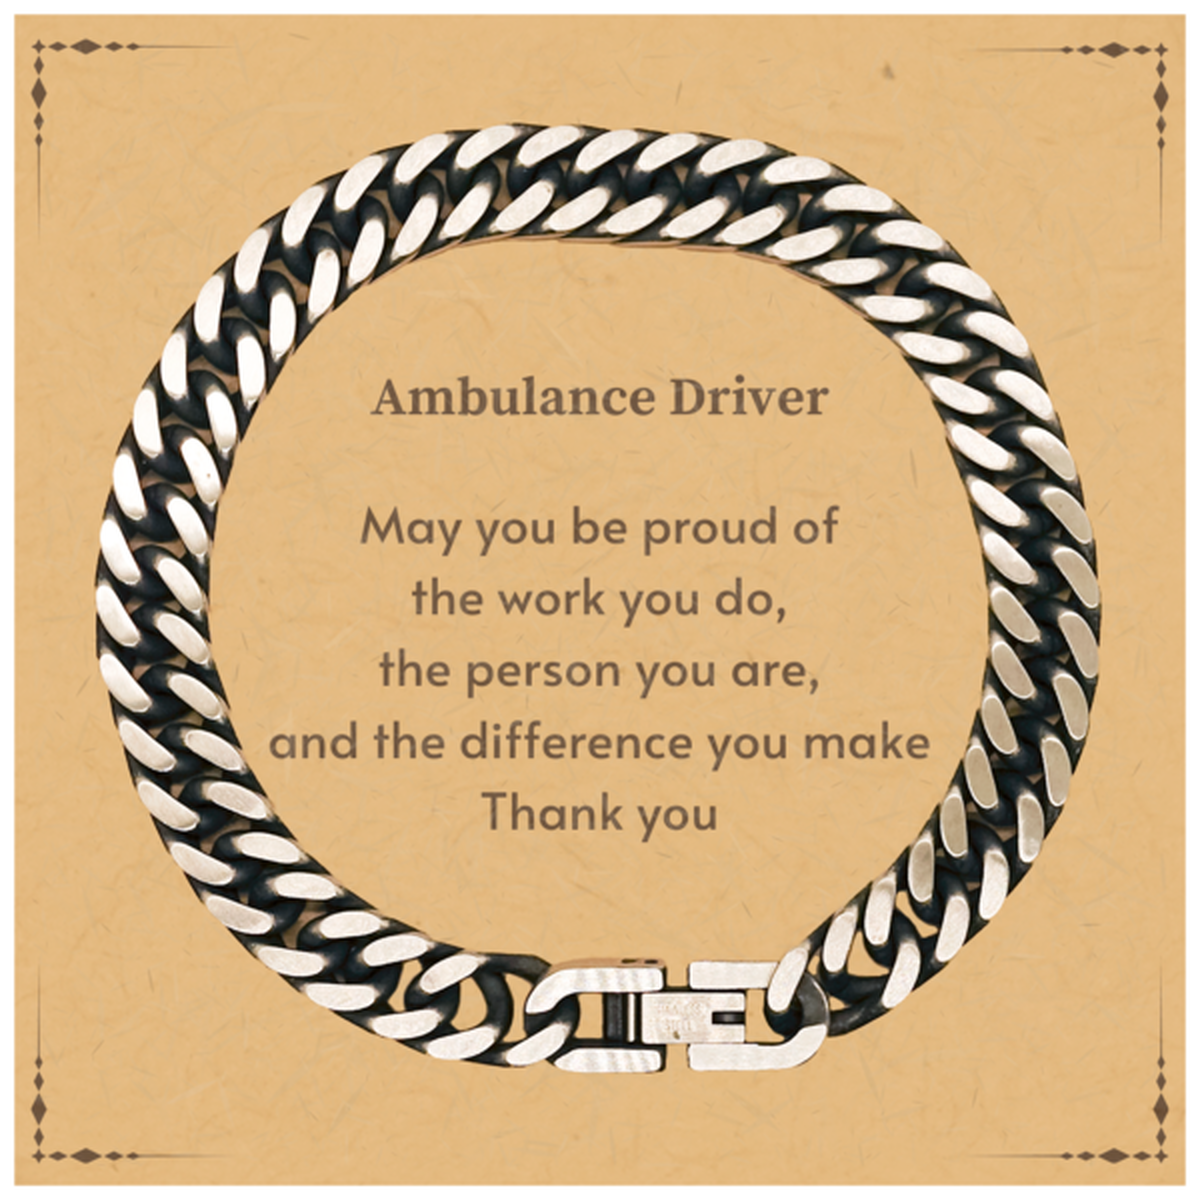 Heartwarming Cuban Link Chain Bracelet Retirement Coworkers Gifts for Ambulance Driver, Ambulance Driver May You be proud of the work you do, the person you are Gifts for Boss Men Women Friends